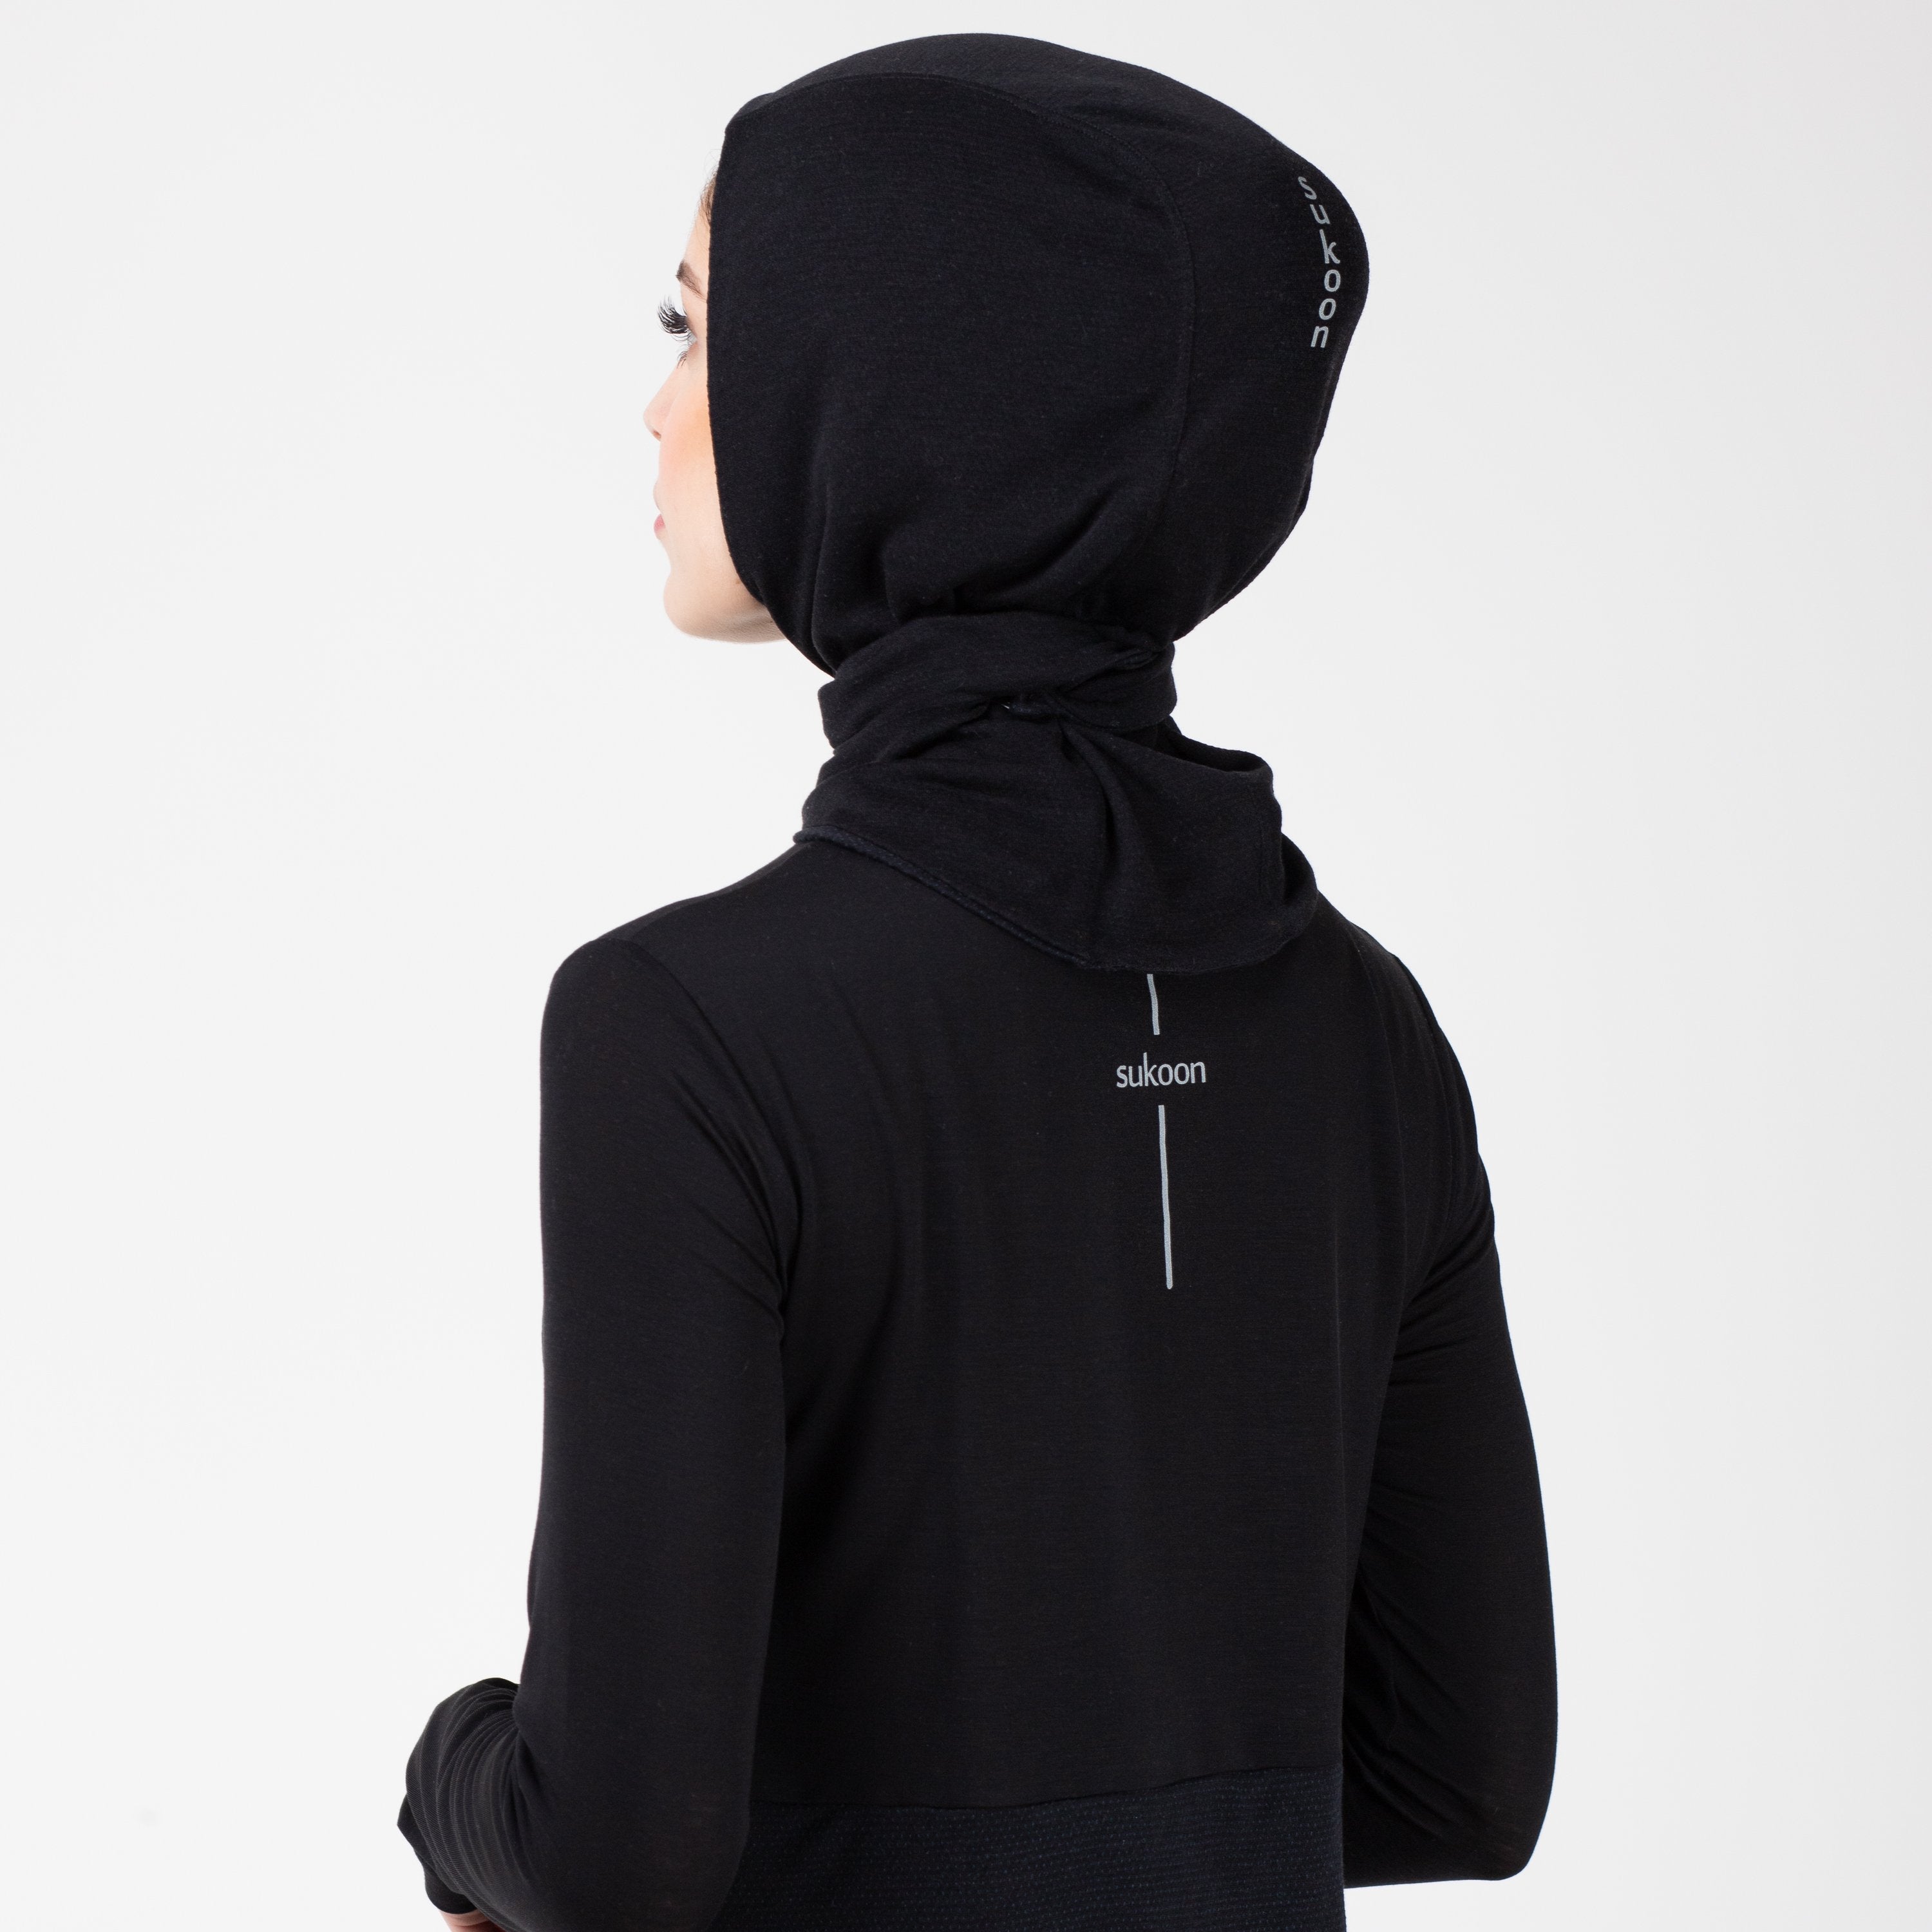 Back detail of a woman in a black shirt with a matching black HAWA hijab.